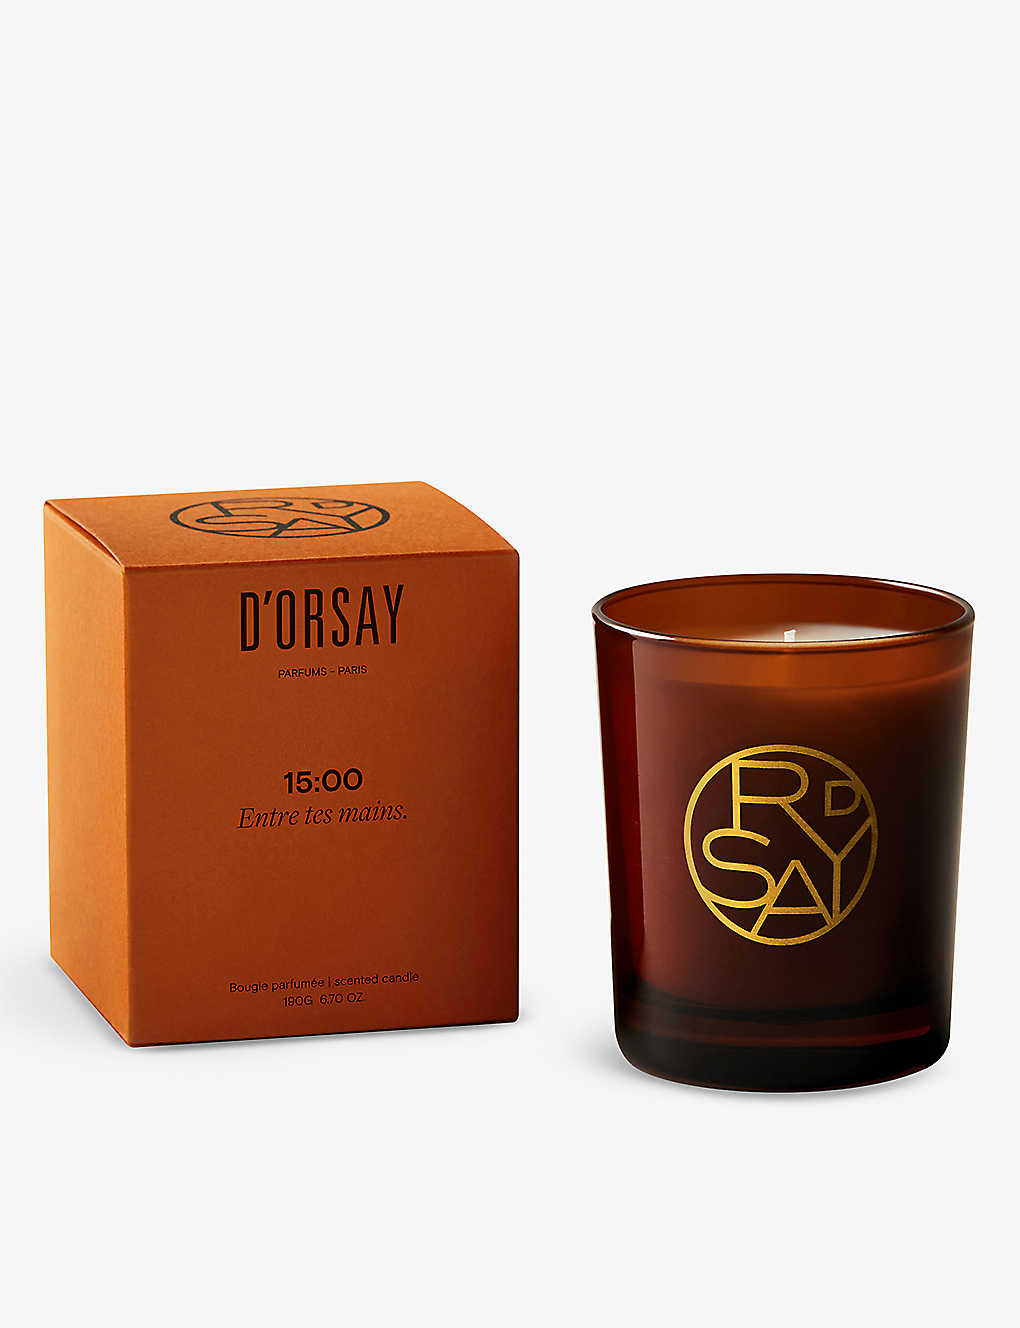 D'orsay 15:00 Scented Candle 190g